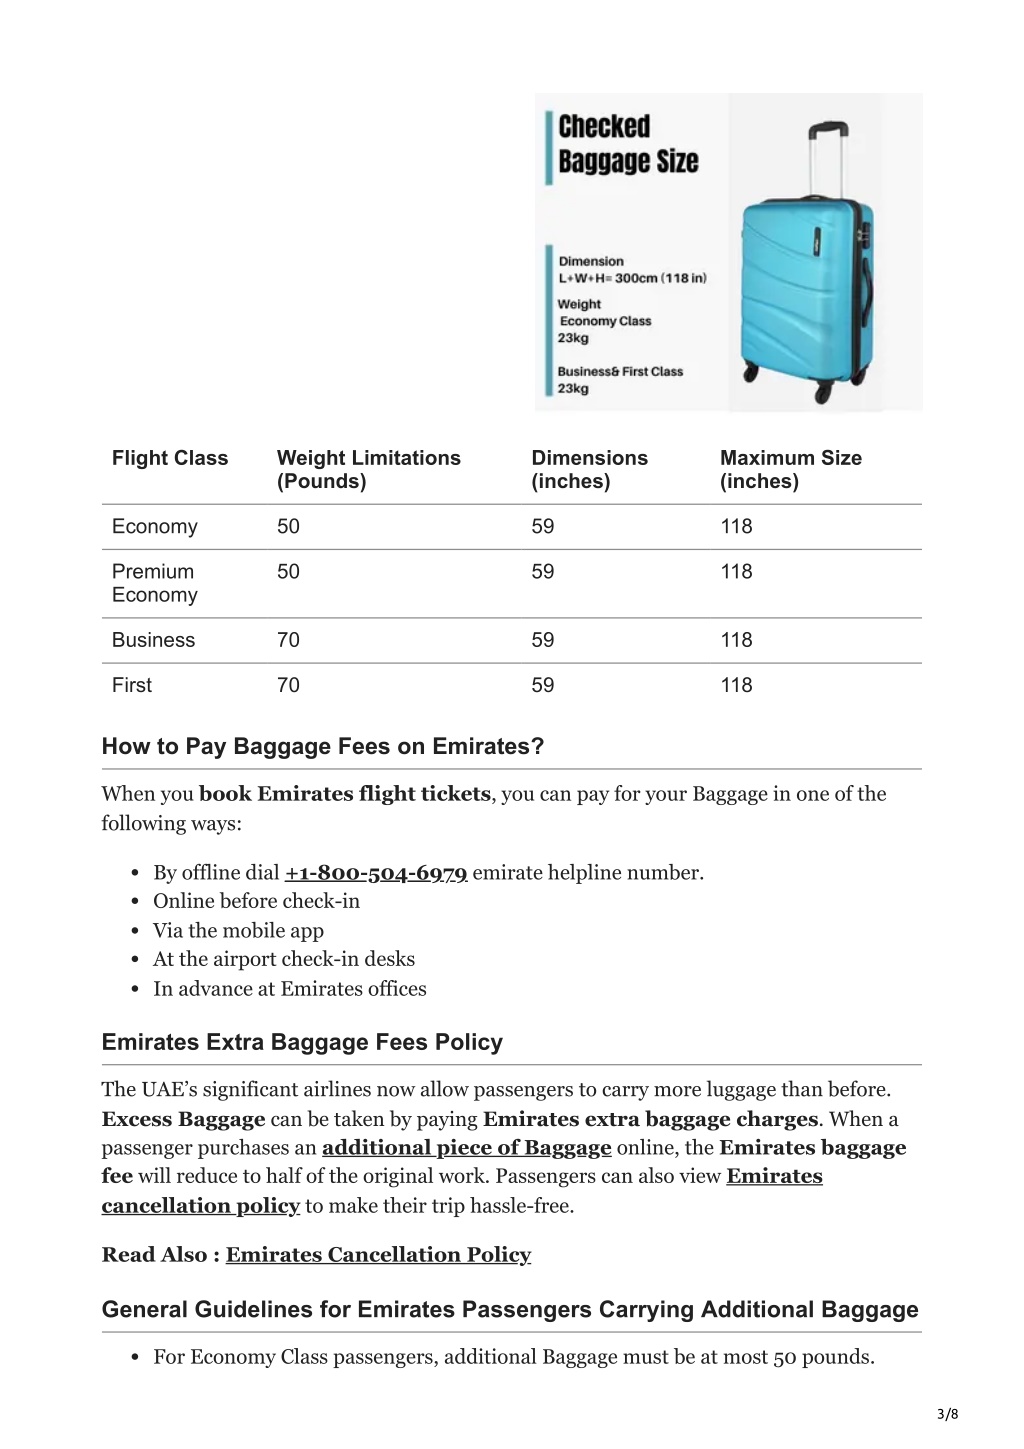 PPT - Emirates Airlines Baggage Allowance, Rules & Policy PowerPoint ...